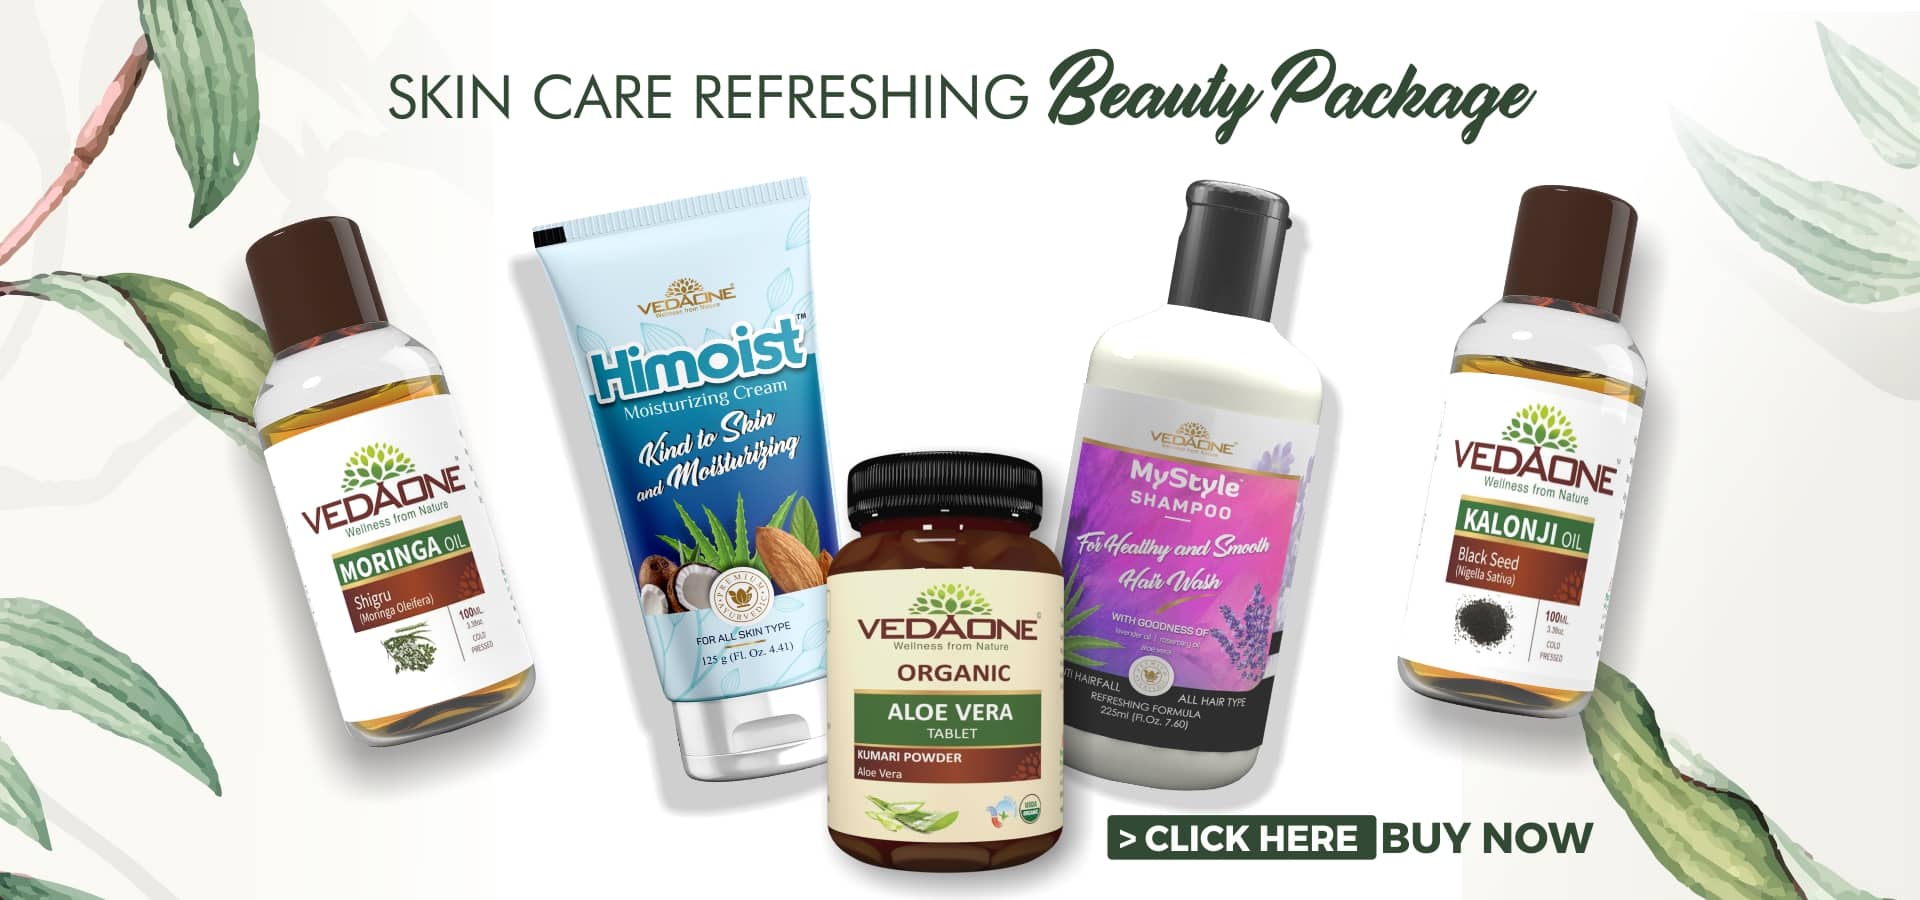 Beauty package Banner